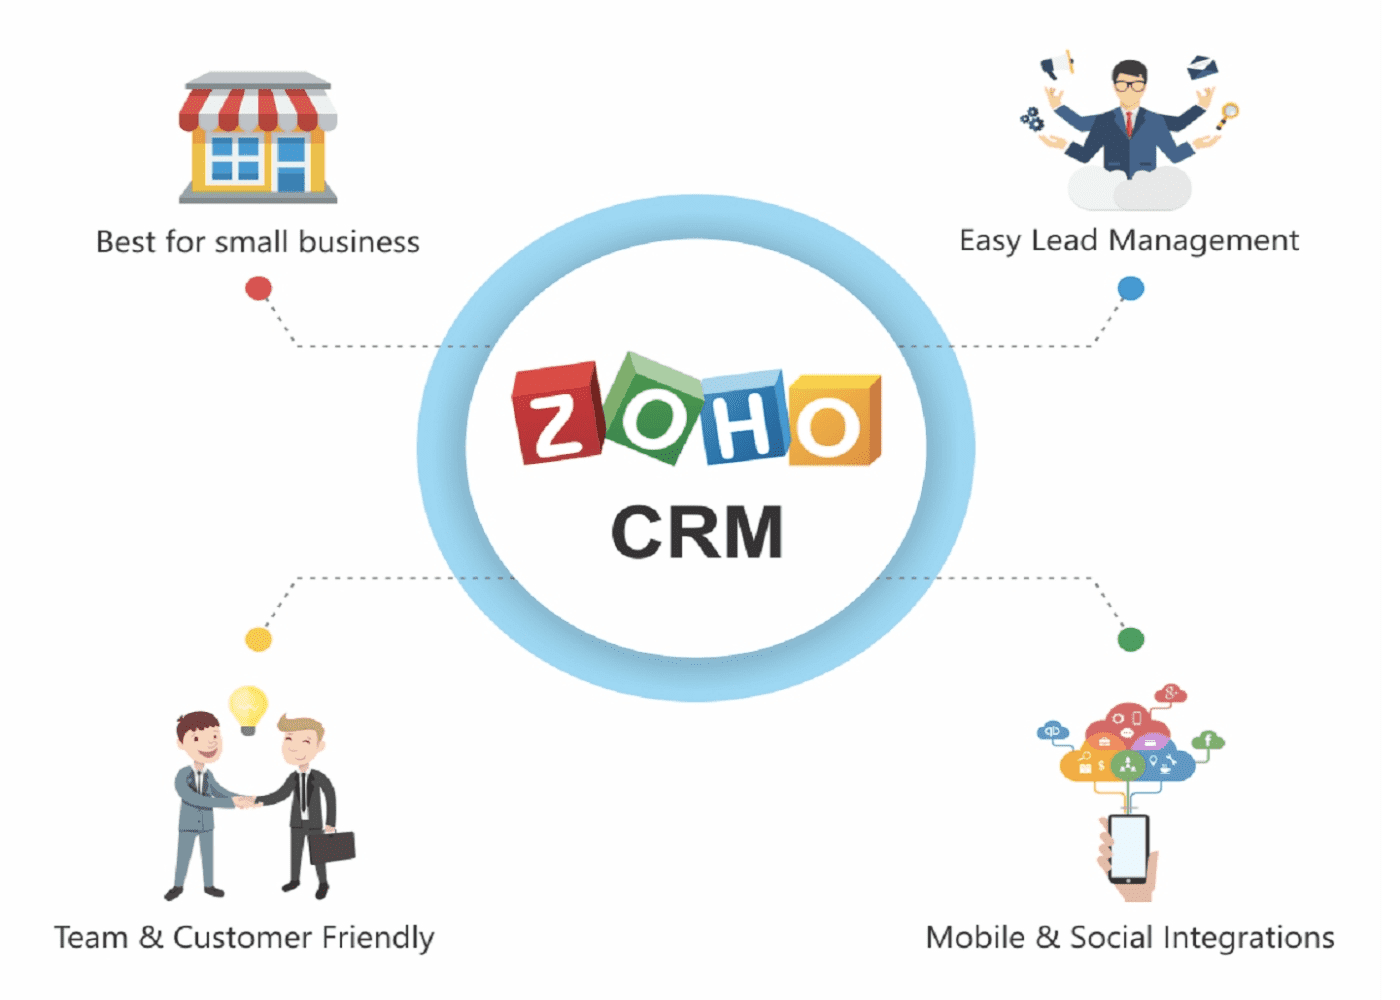 Benefits of Using Zoho CRM